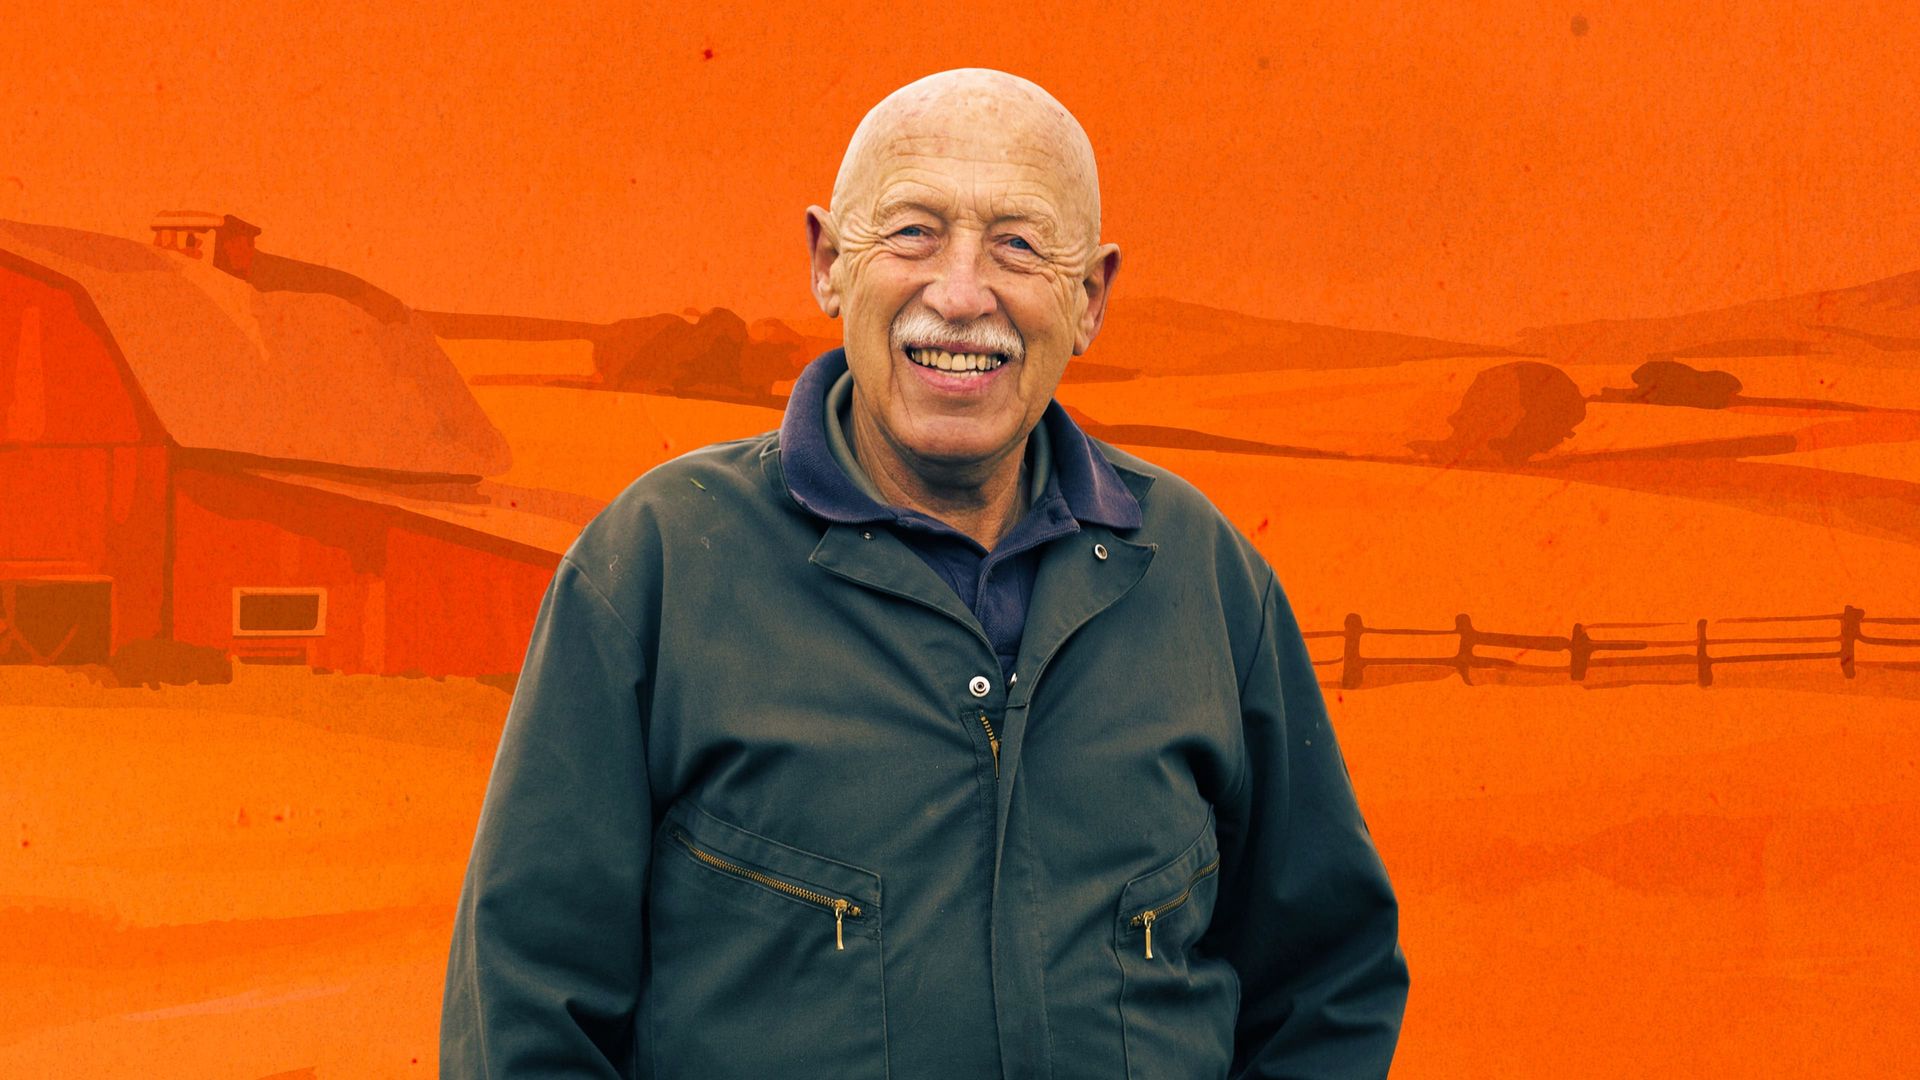 The Incredible Dr. Pol background